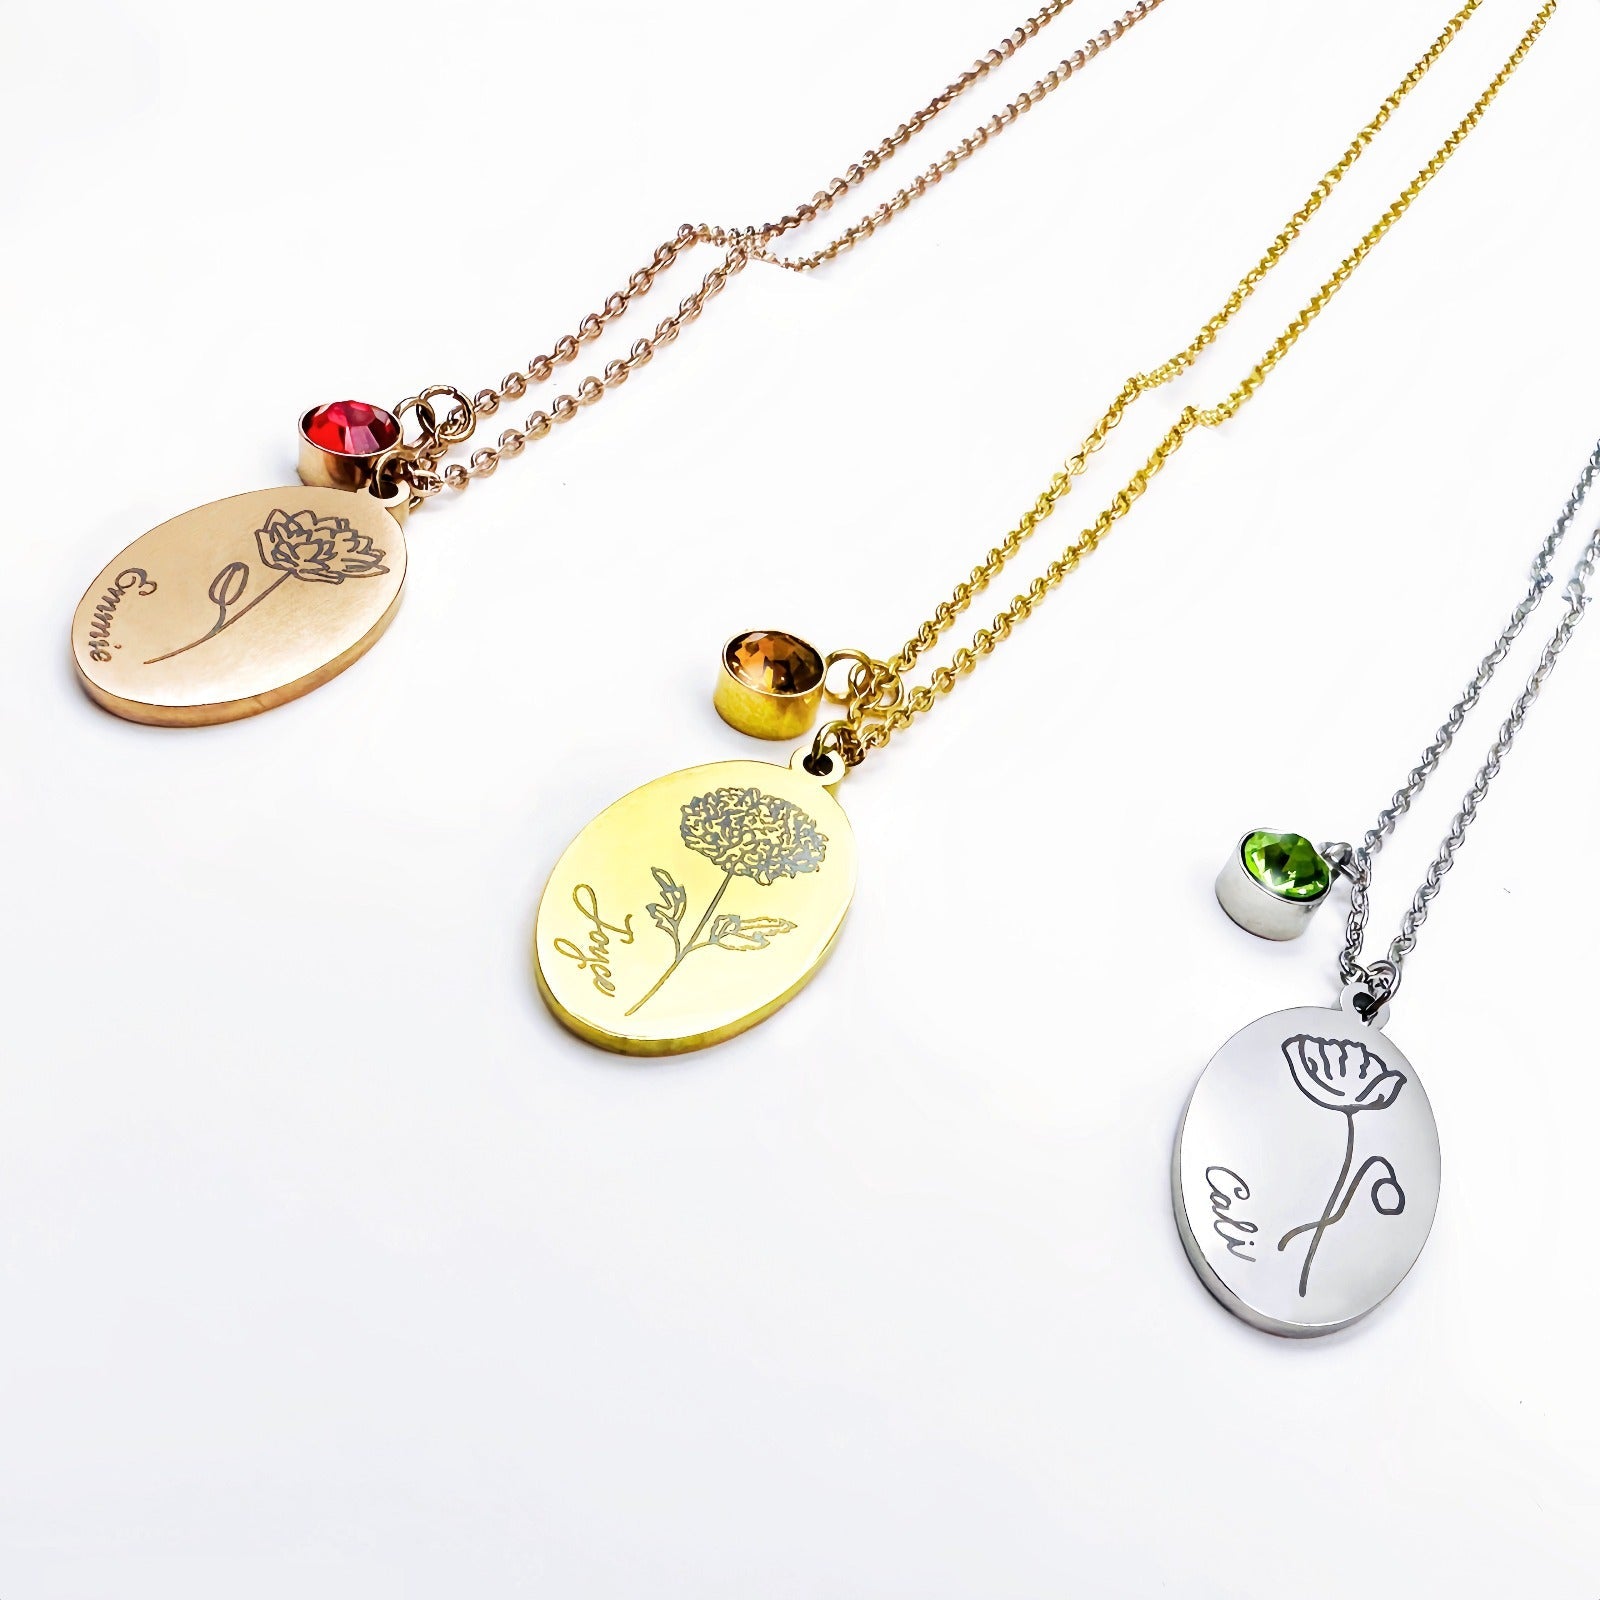 Boltiesd™ Flower Name Necklace With Stone - Boltiesd™